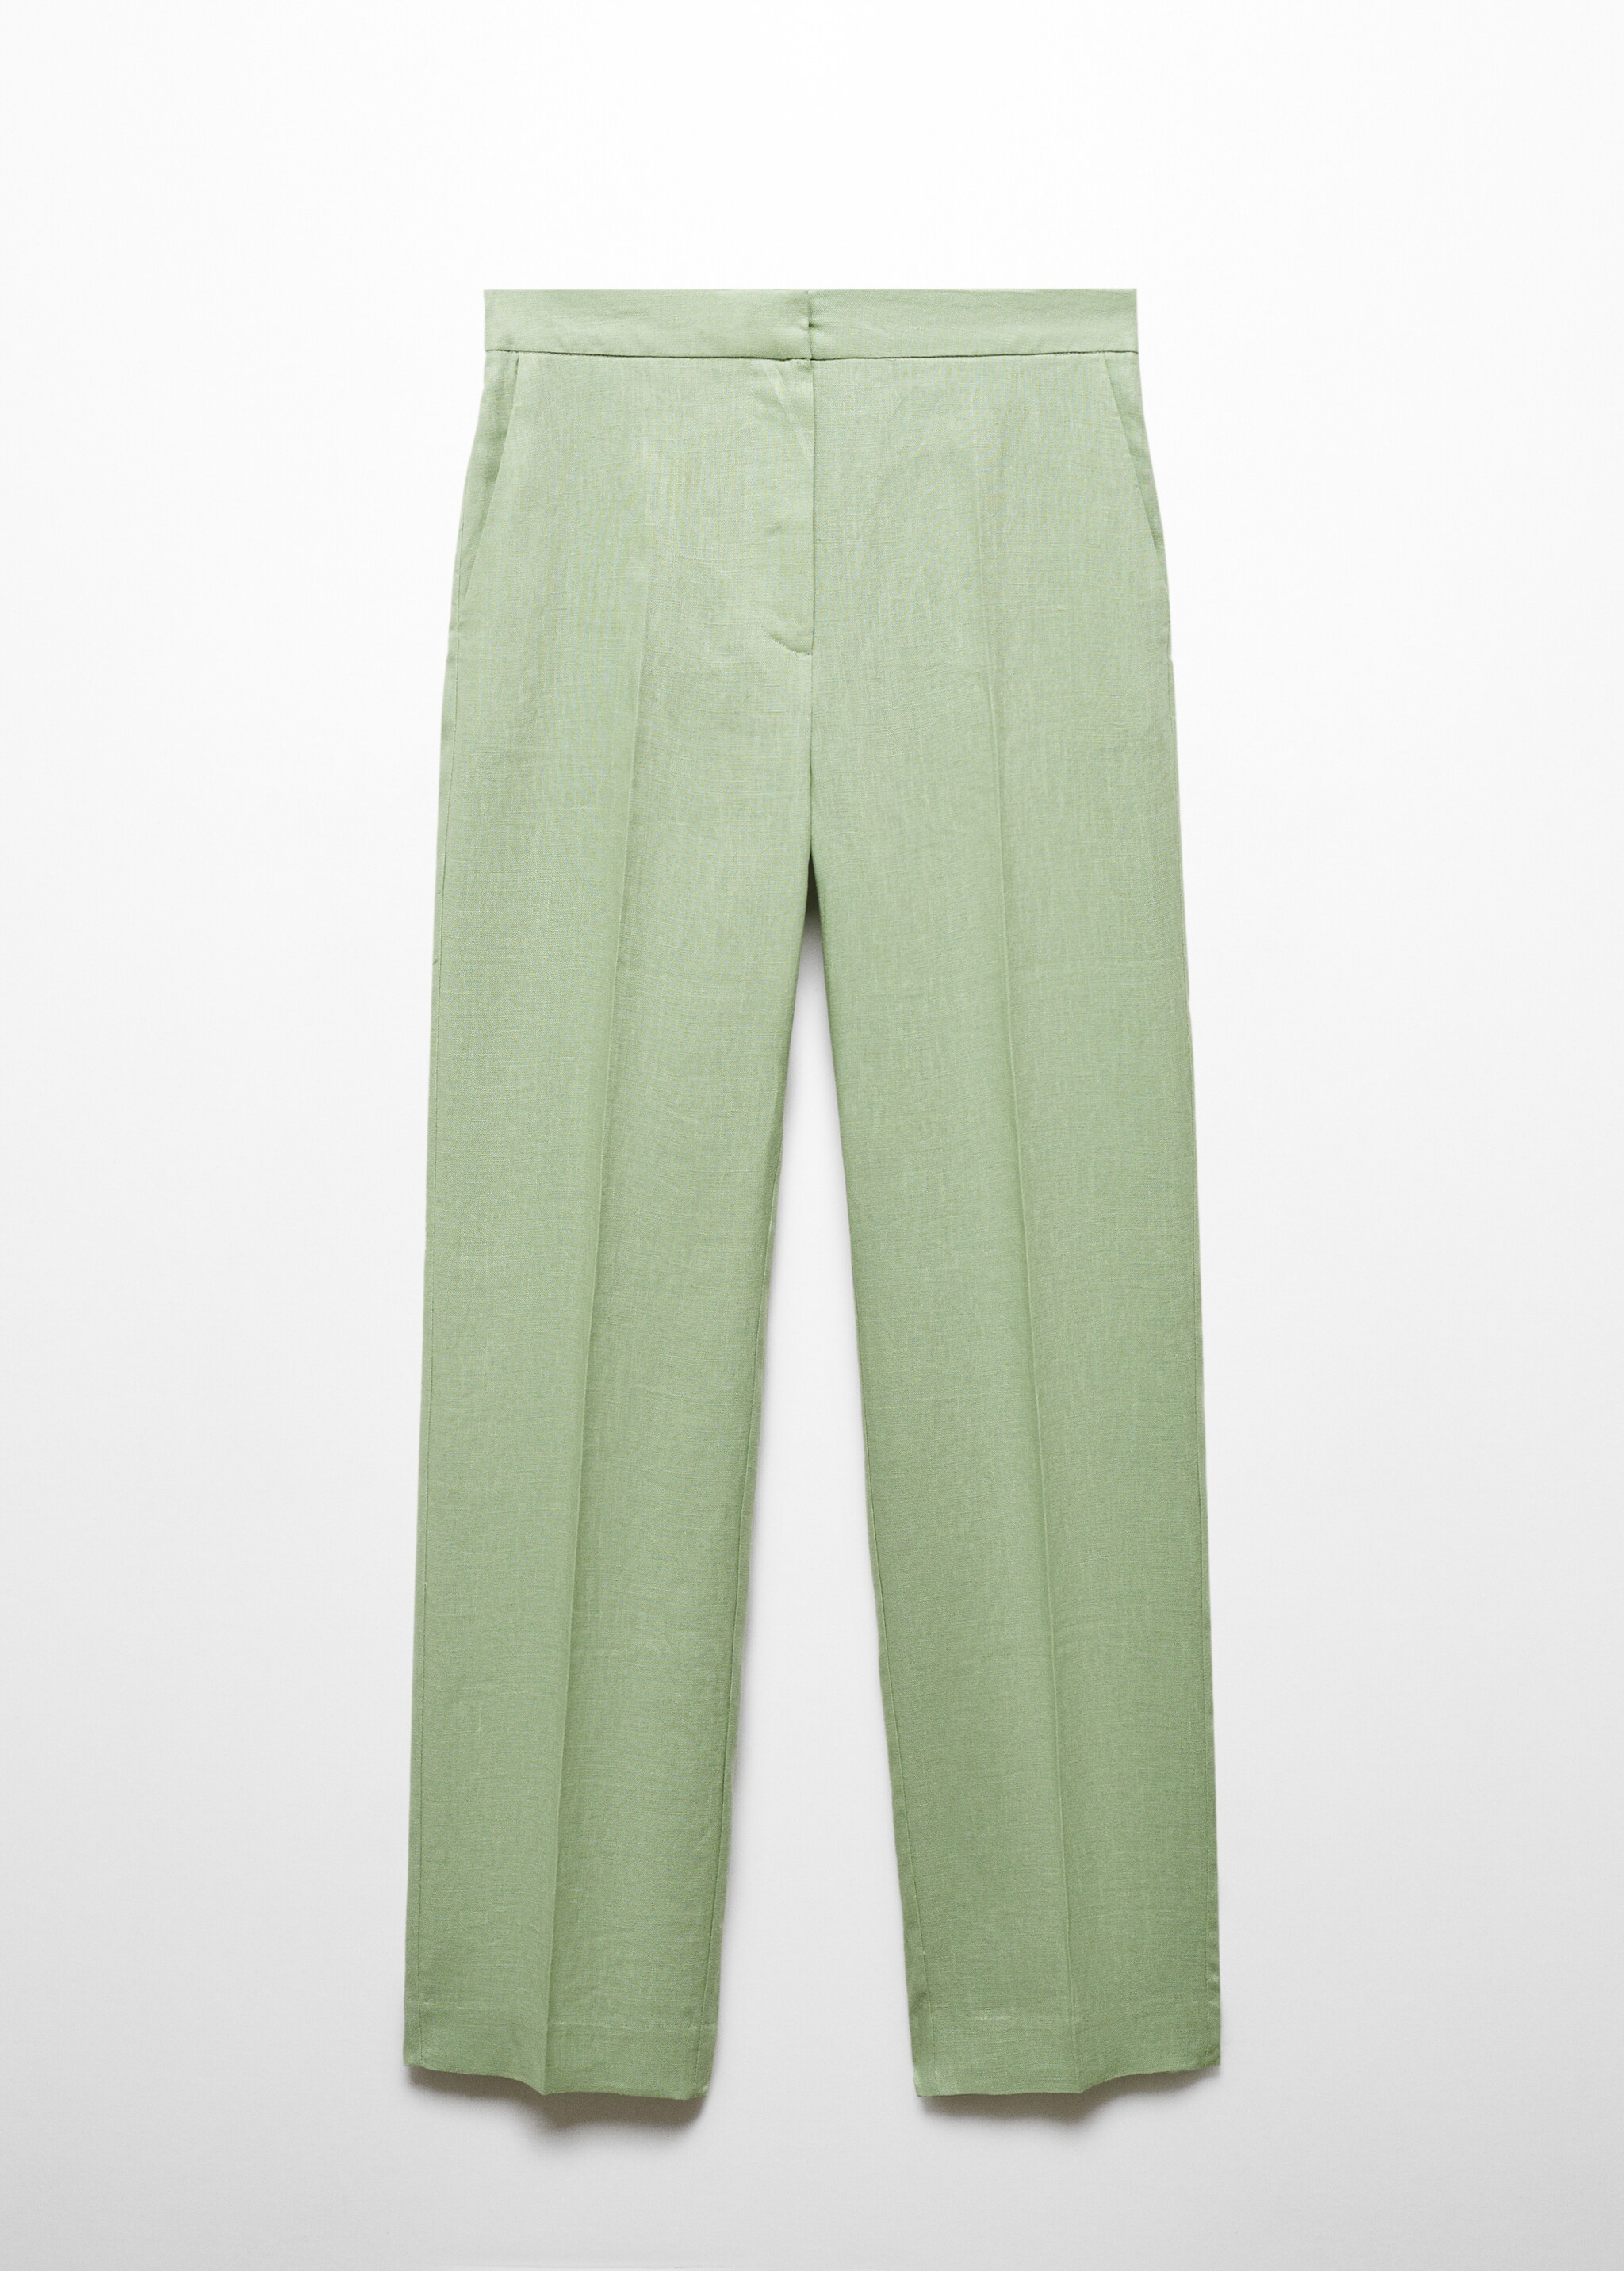 100% linen straight trousers - Article without model